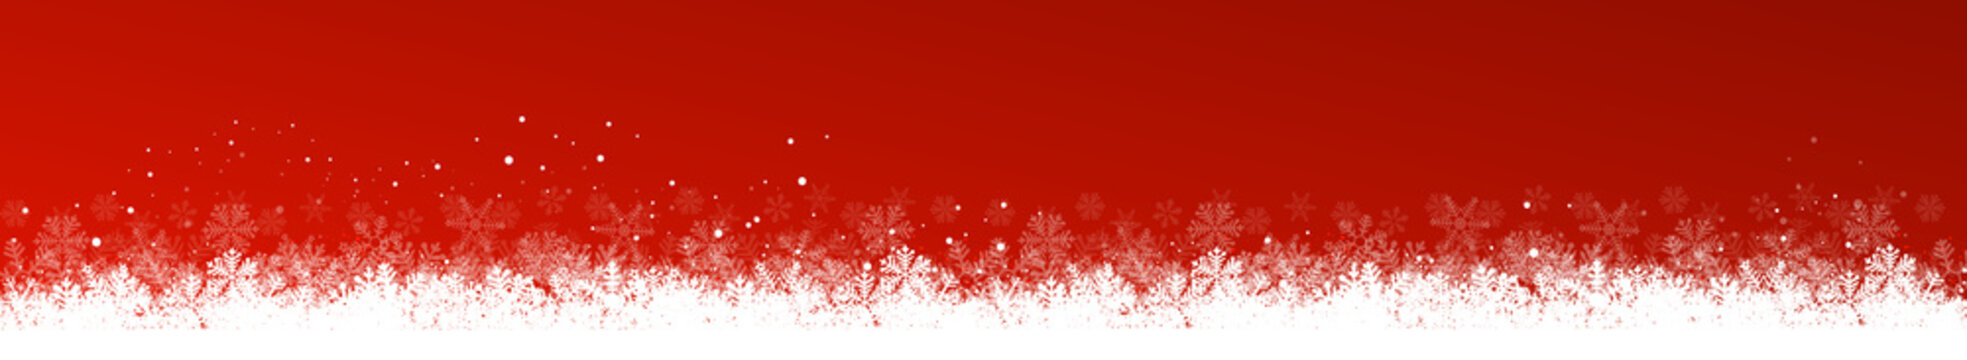 Panorama red christmas background